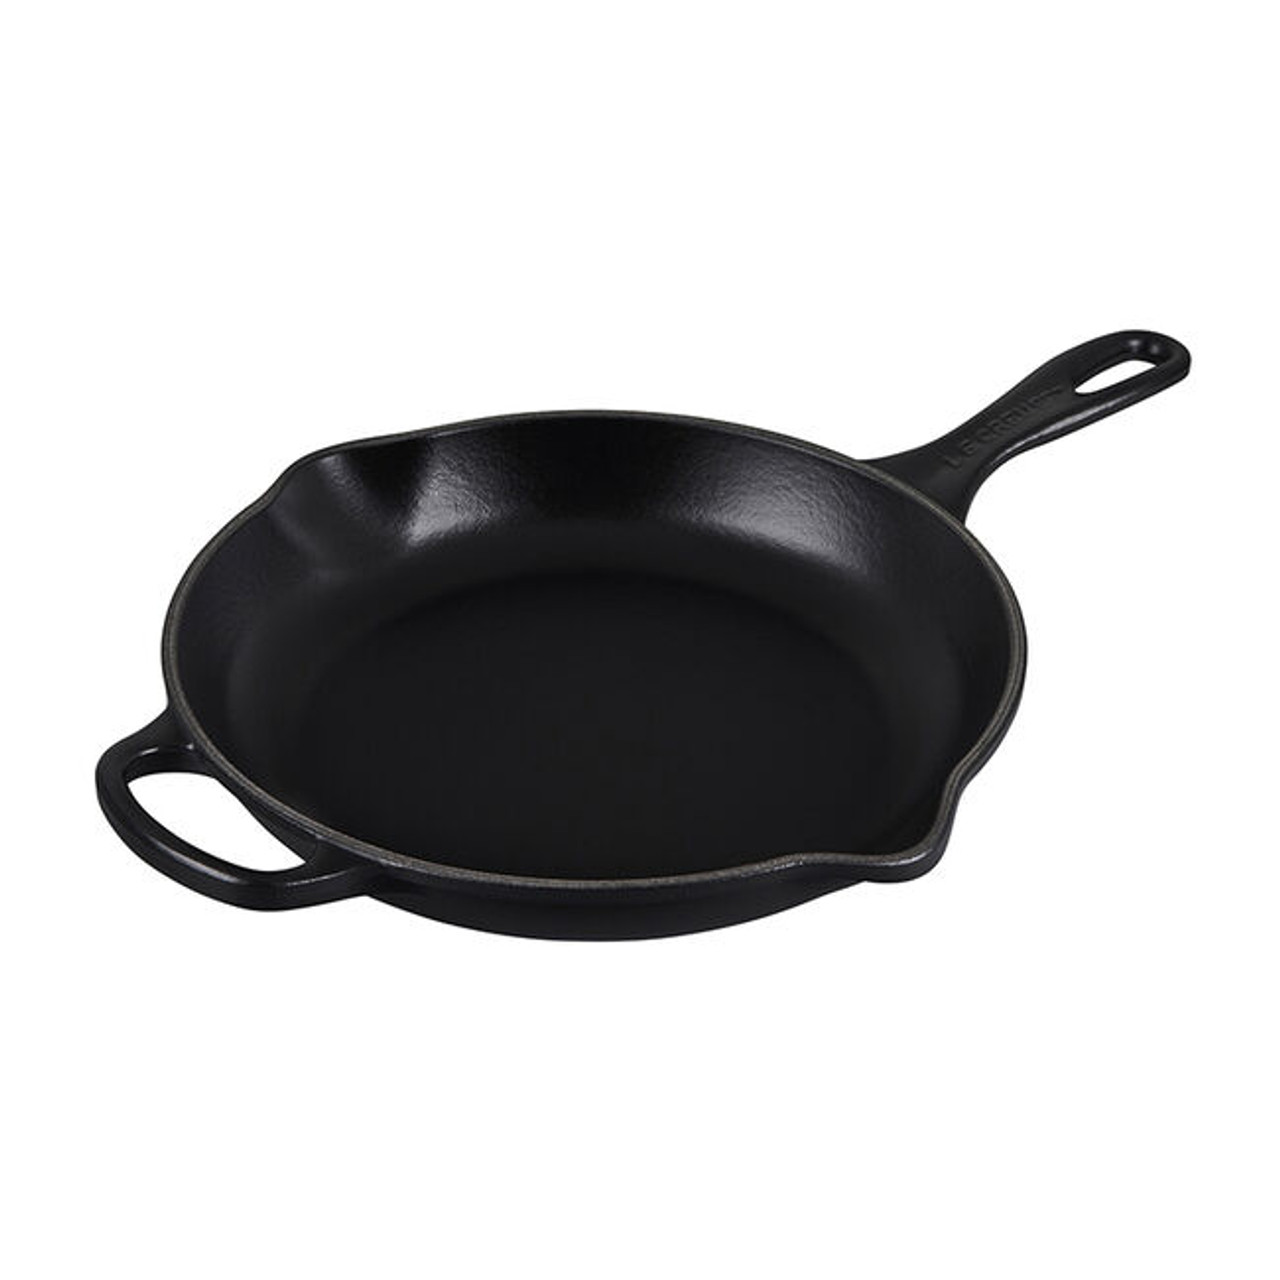 Lodge Cast Iron Essential Cast Iron Pan Set - 10.25-in Skillet